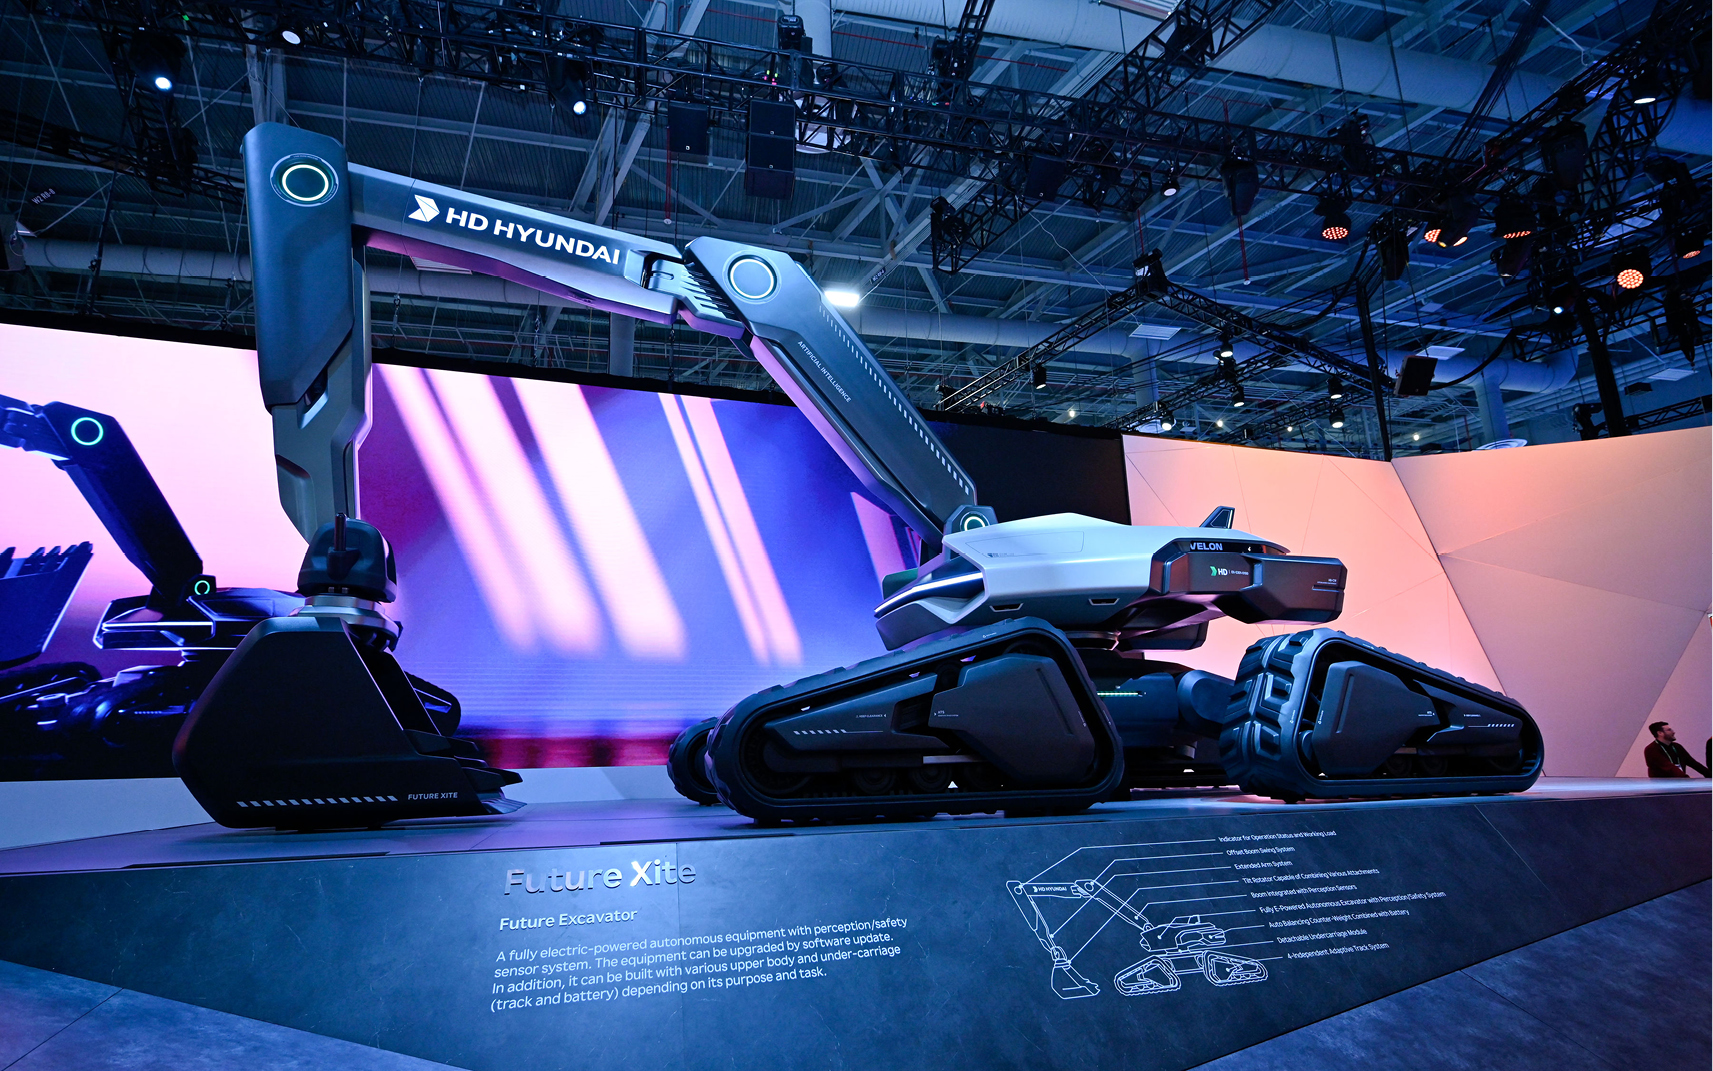 A concept crawler excavator on display at CES 2024.